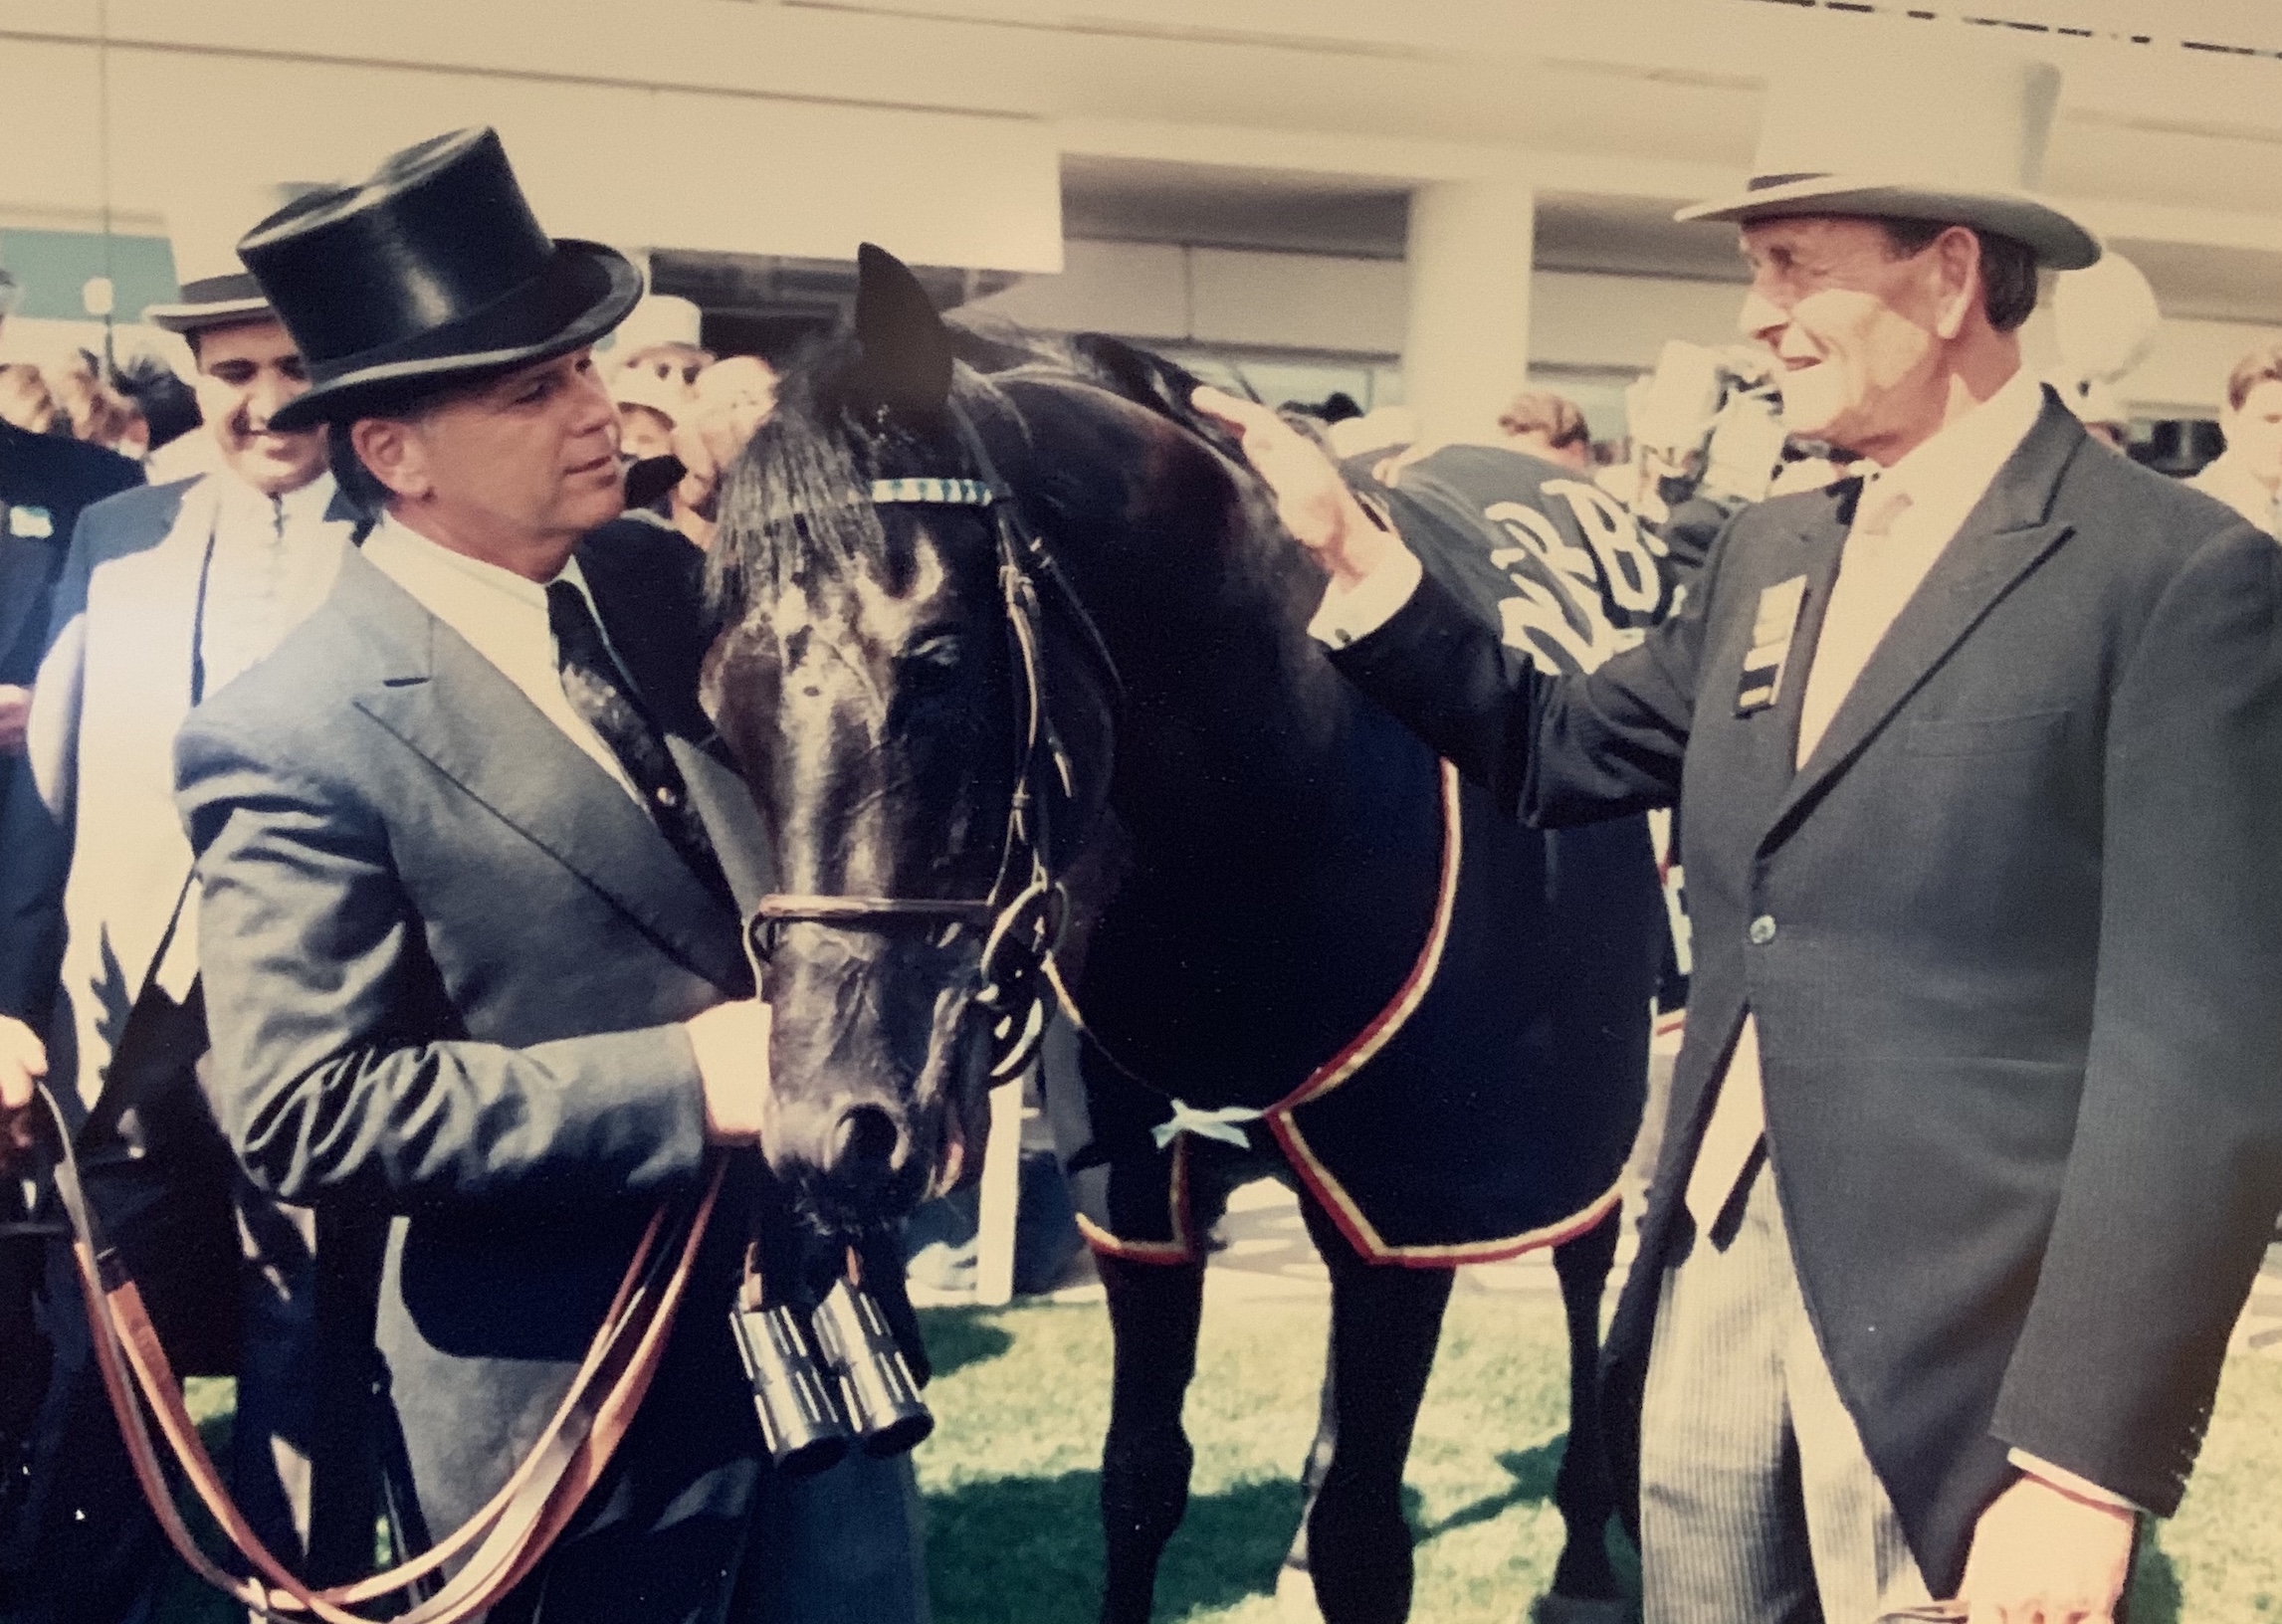 Crowning glory: Erhaab with Shadwell’s Rick Nicholls and trainer John Dunlop after his 1994 victory at Epsom Downs